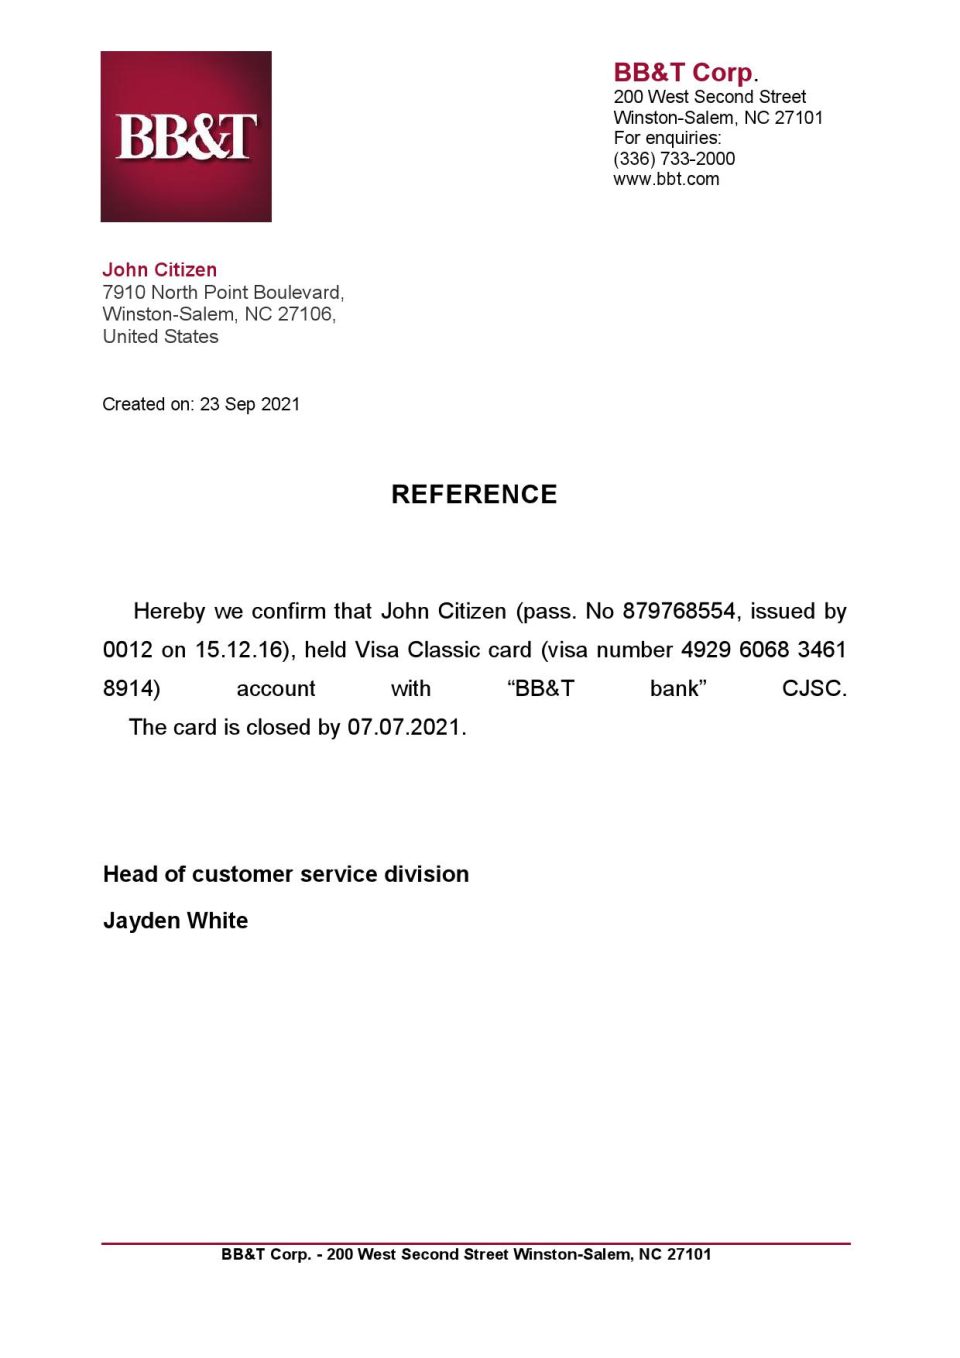 Download USA BB&T Bank Reference Letter Templates | Editable Word